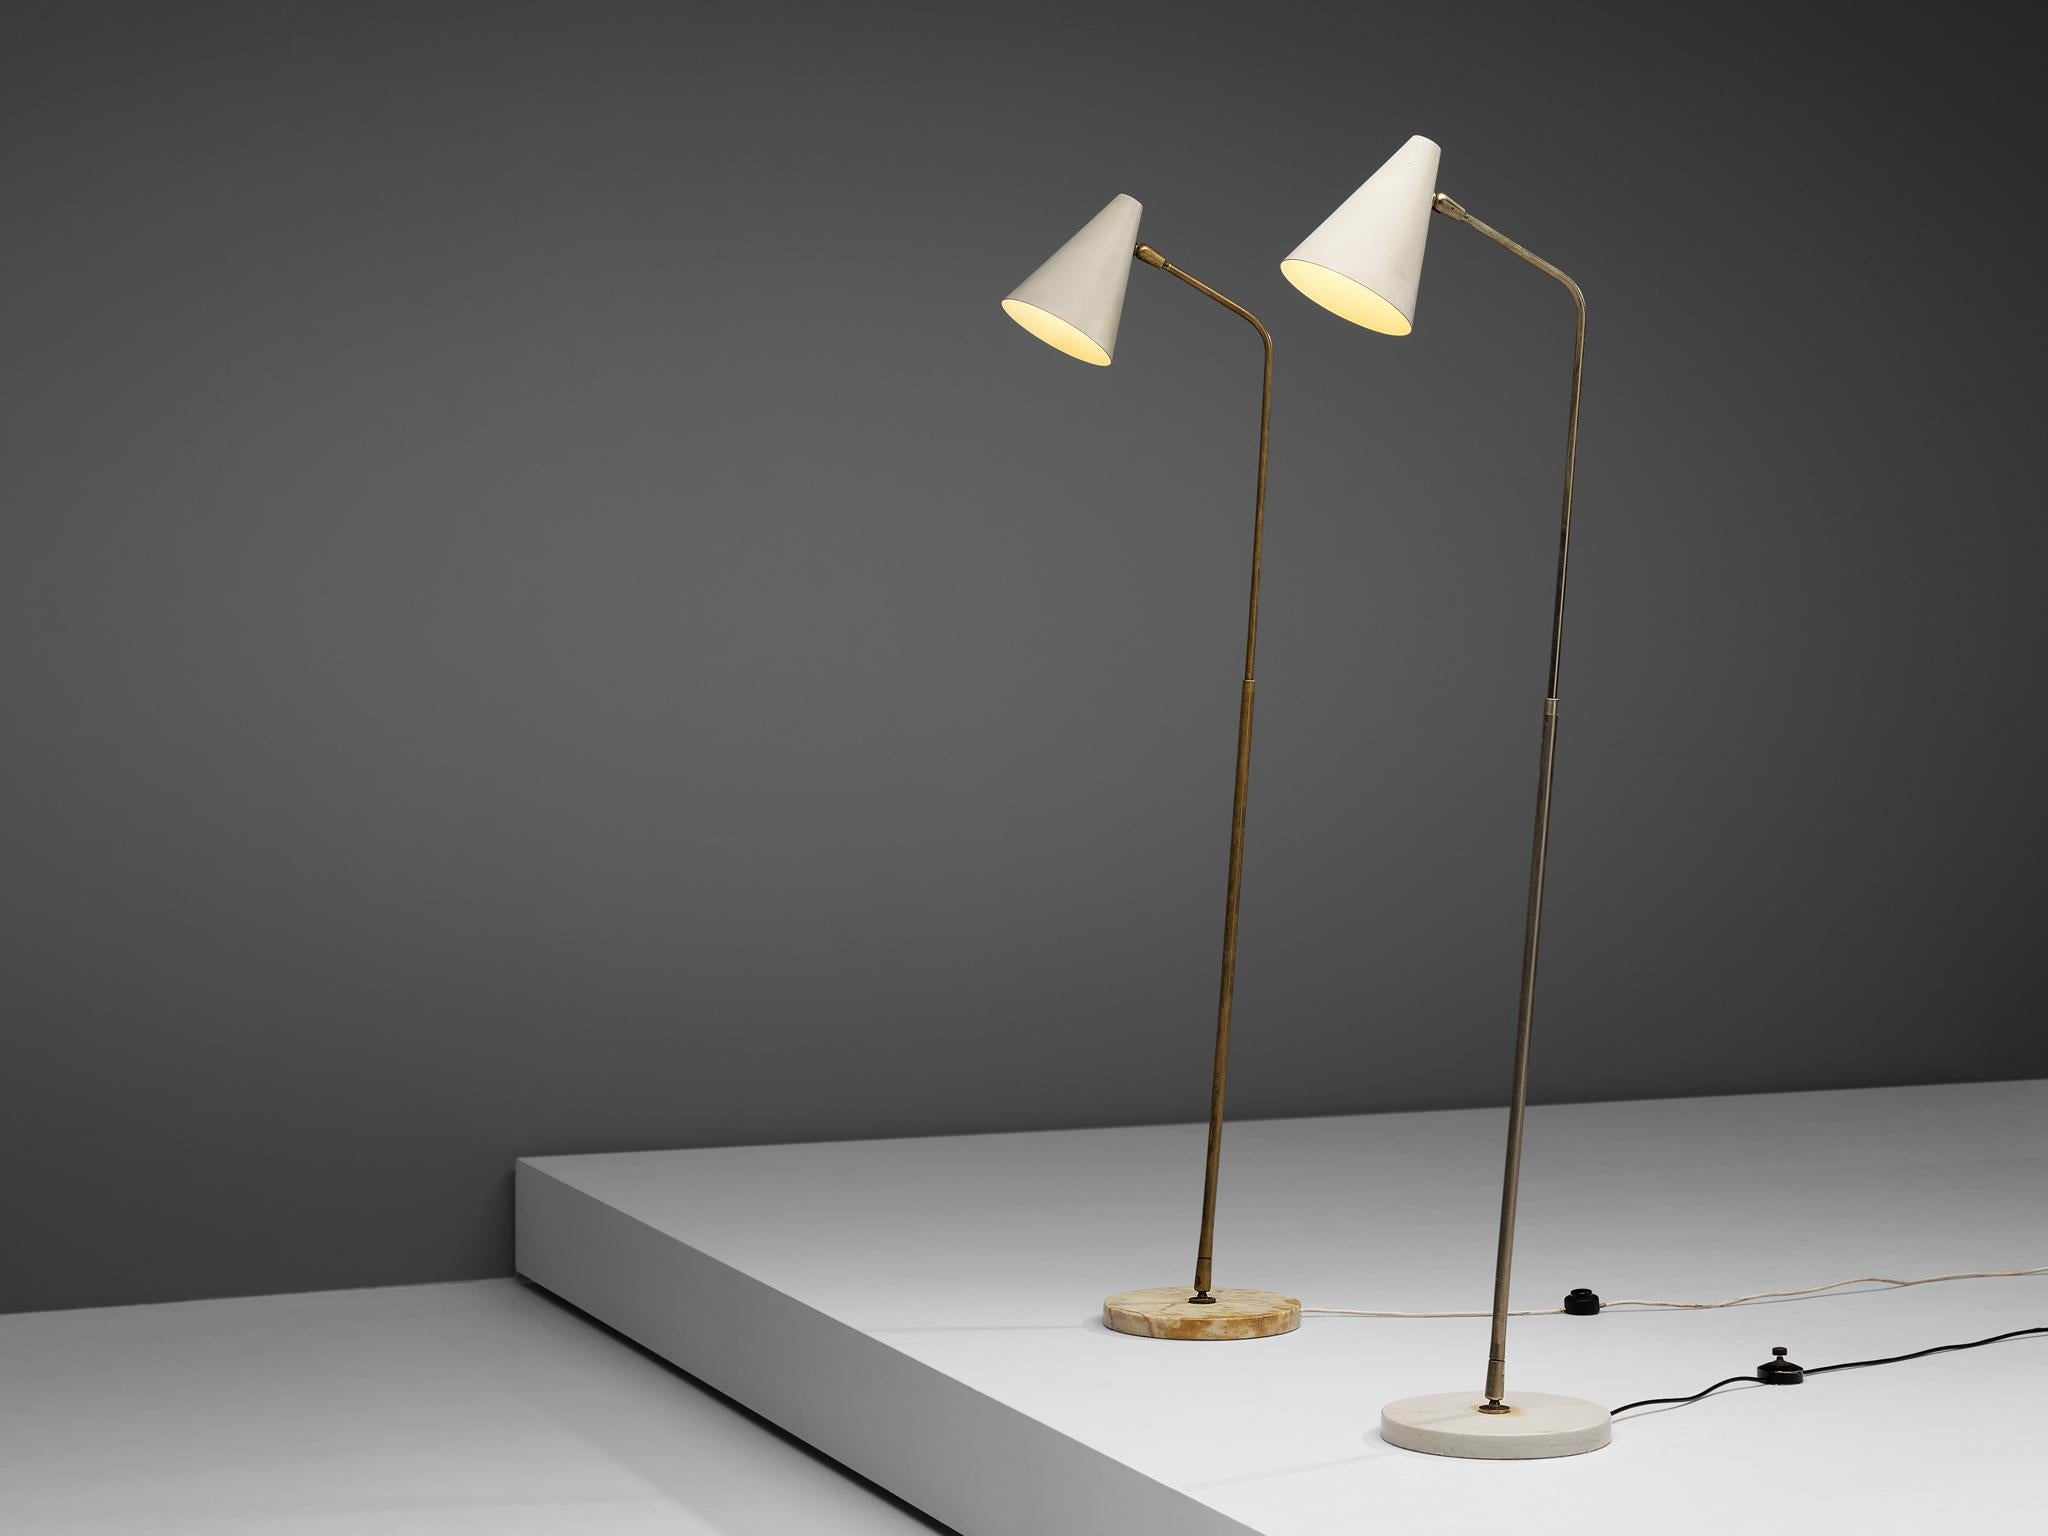 Giuseppe Ostuni for O-Luce, floor lamps, brass, metal and marble, Italy, 1950s

O-Luce floor lamps by Giuseppe Ostuni with a beautiful original off-white shade. This stem is fully adjustable due to this extension into various lengths. The round